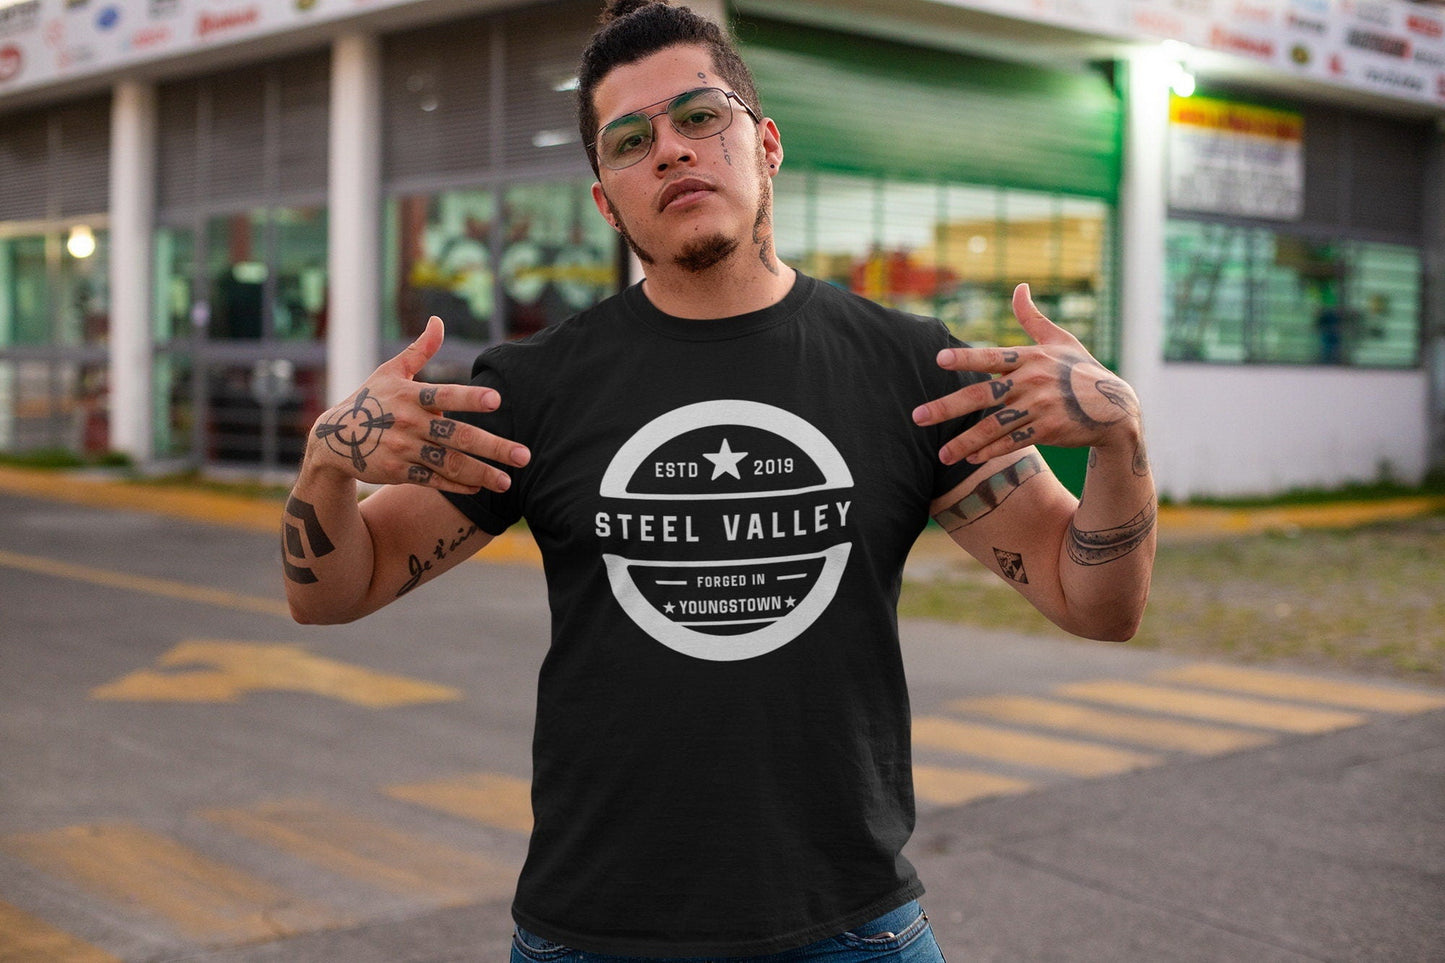 T-Shirt Authentic Steel Valley Hometown Pride Custom Shirt & Ink Color, Shirts and Tees, T-Shirt, Tees for Men, Women, and Children